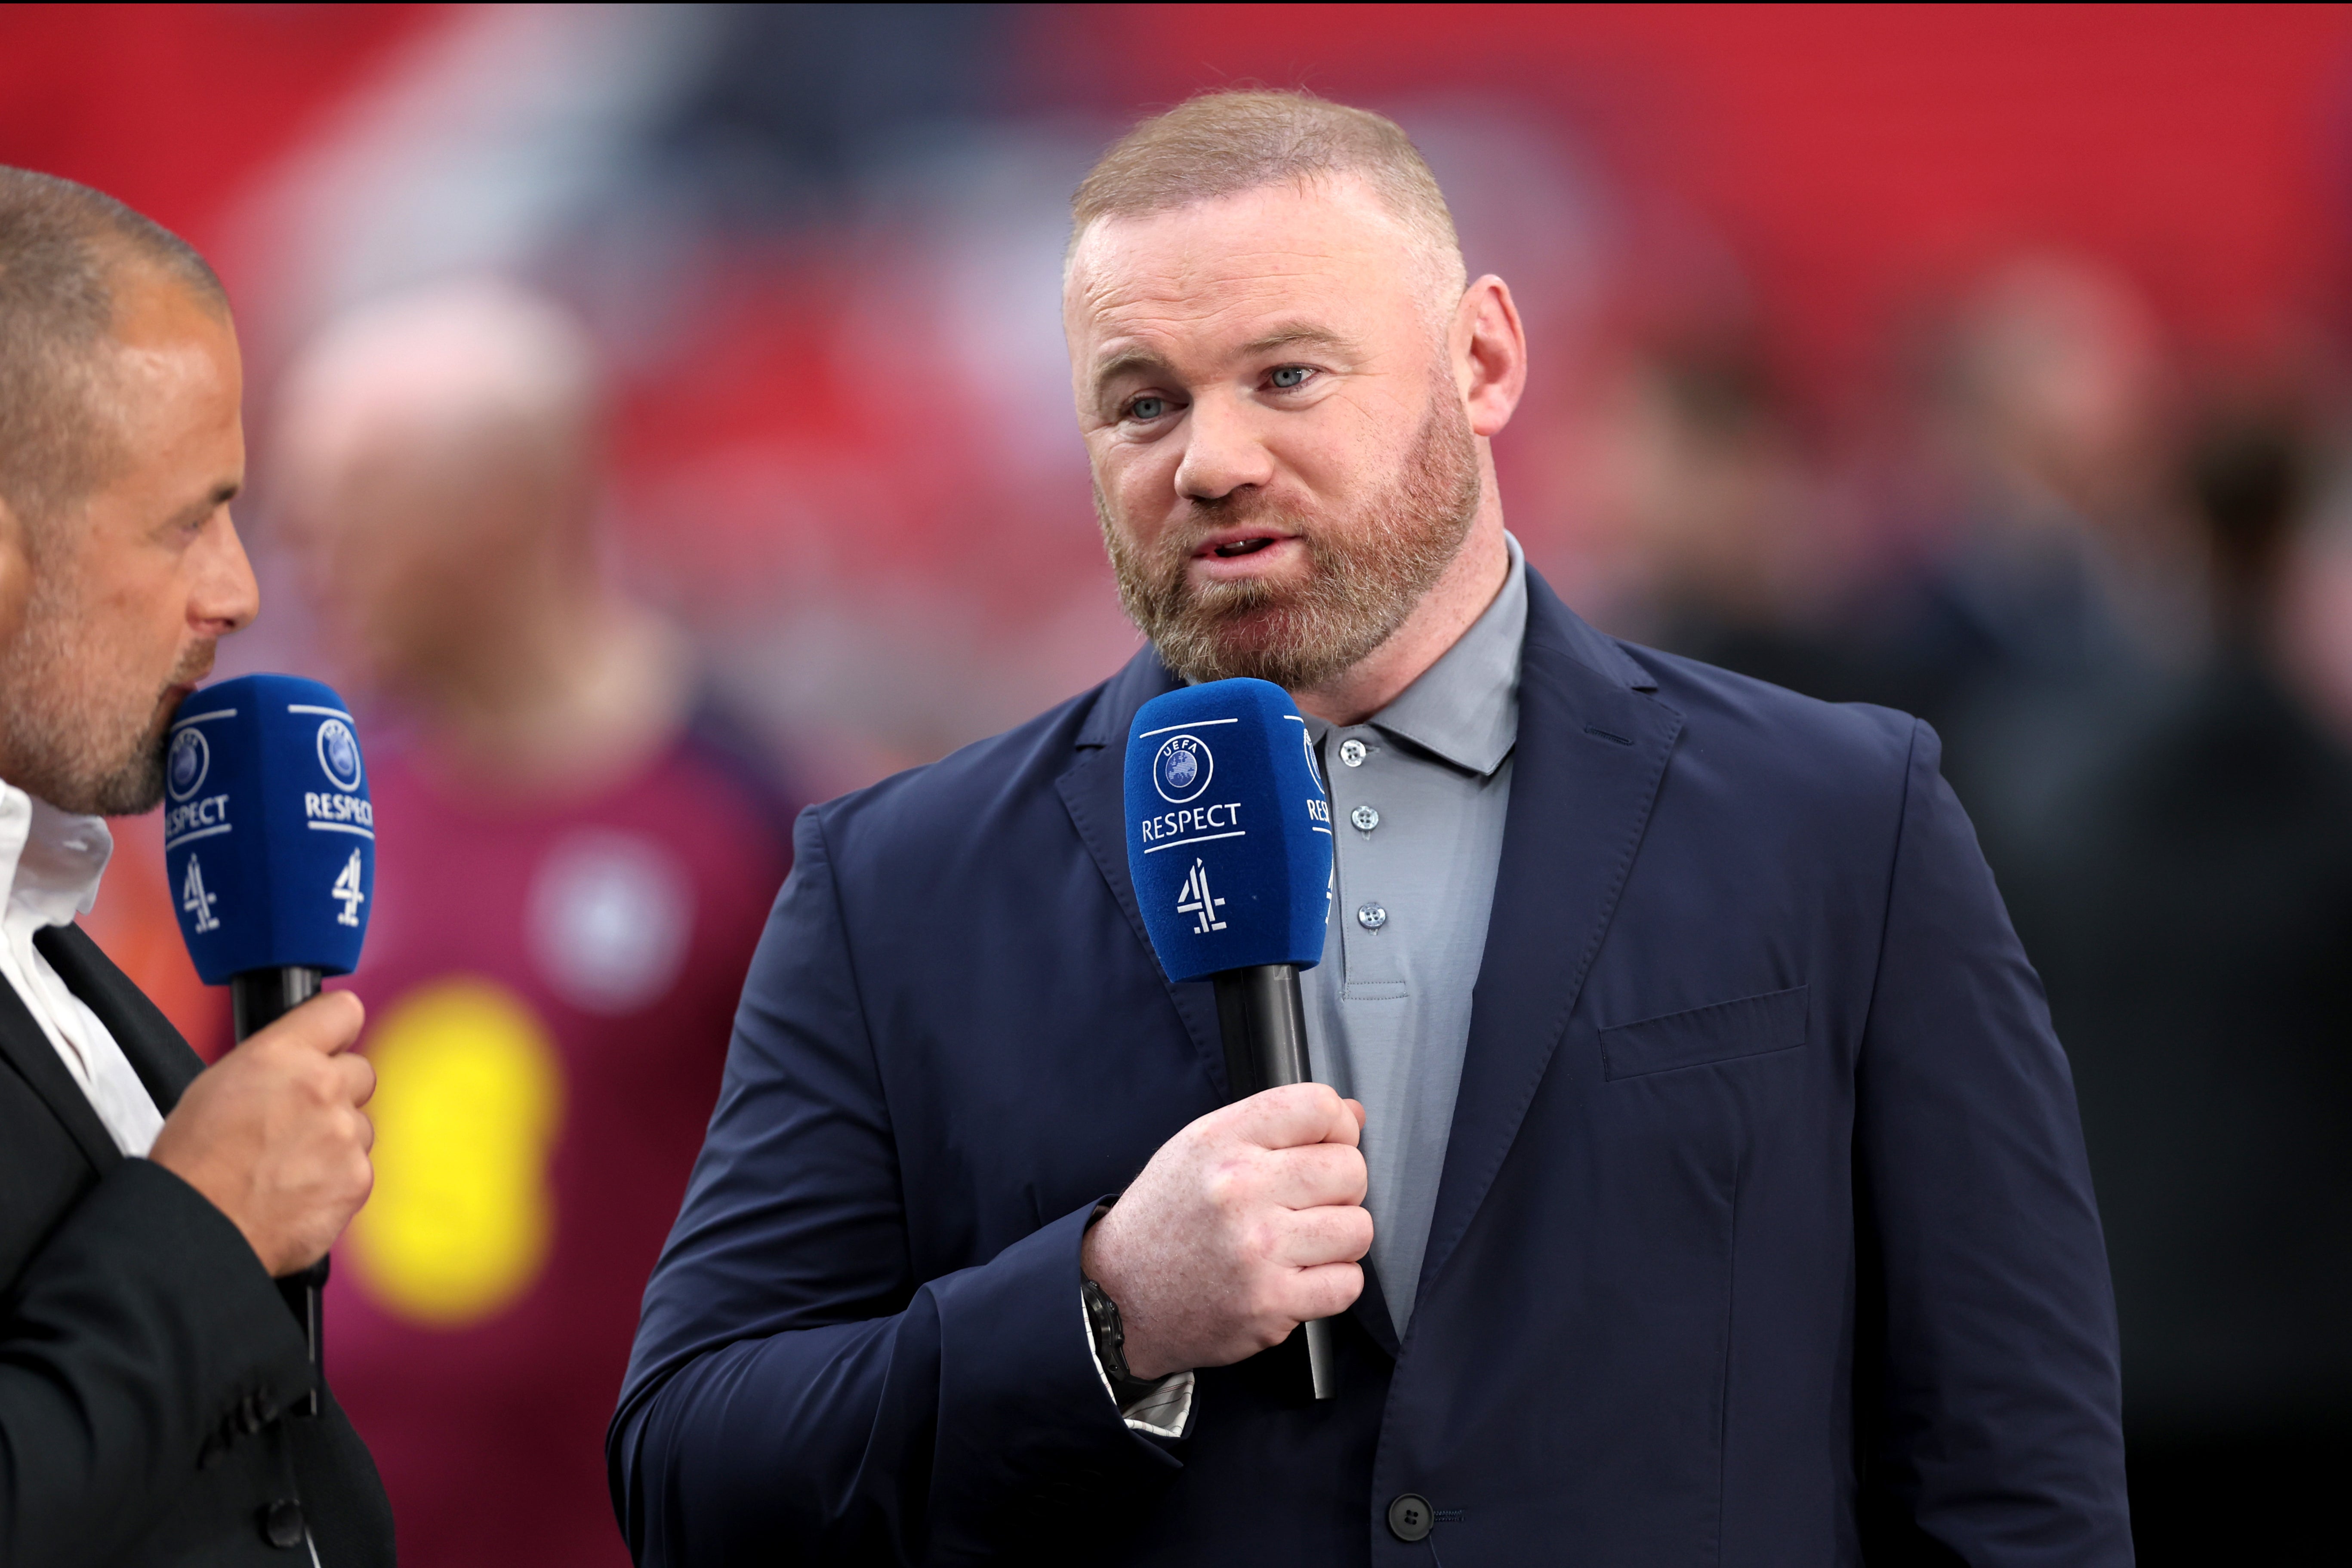 Wayne Rooney has put his punditry work on pause to take the Plymouth job